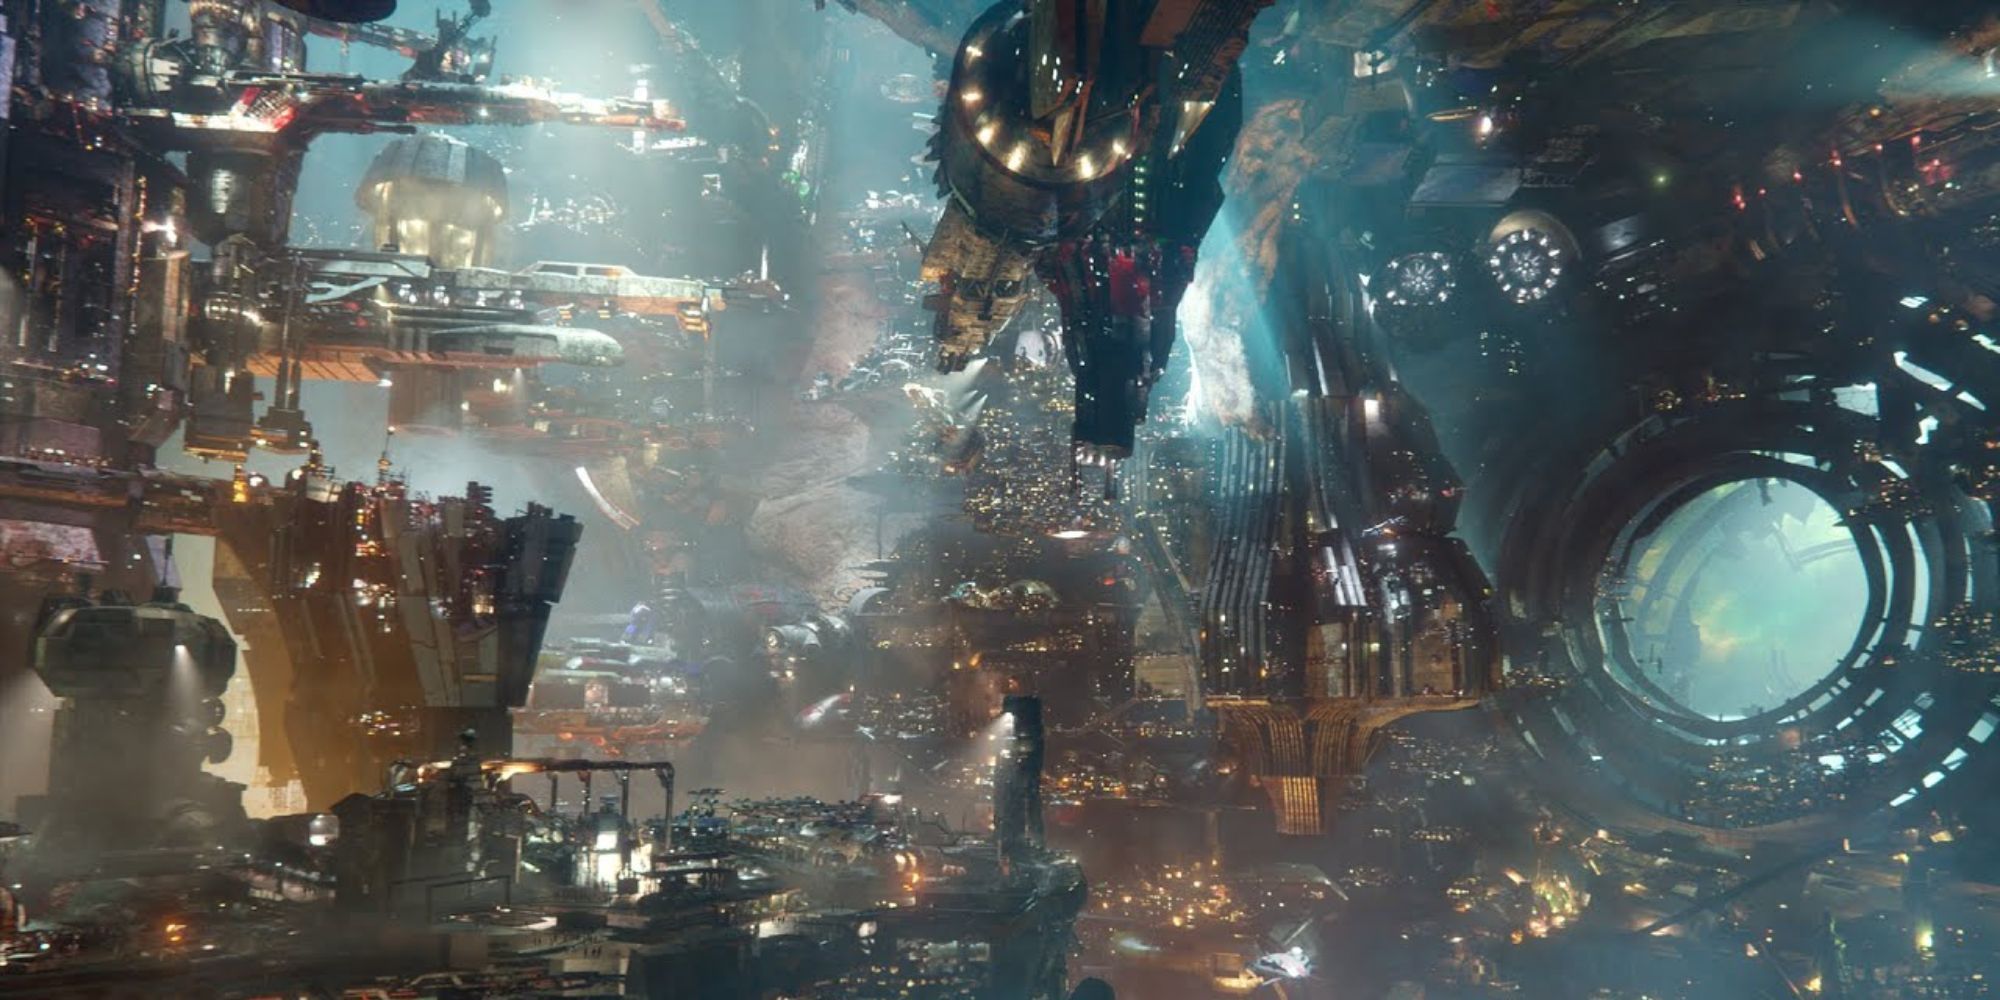 Knowhere in Guardians of the Galaxy